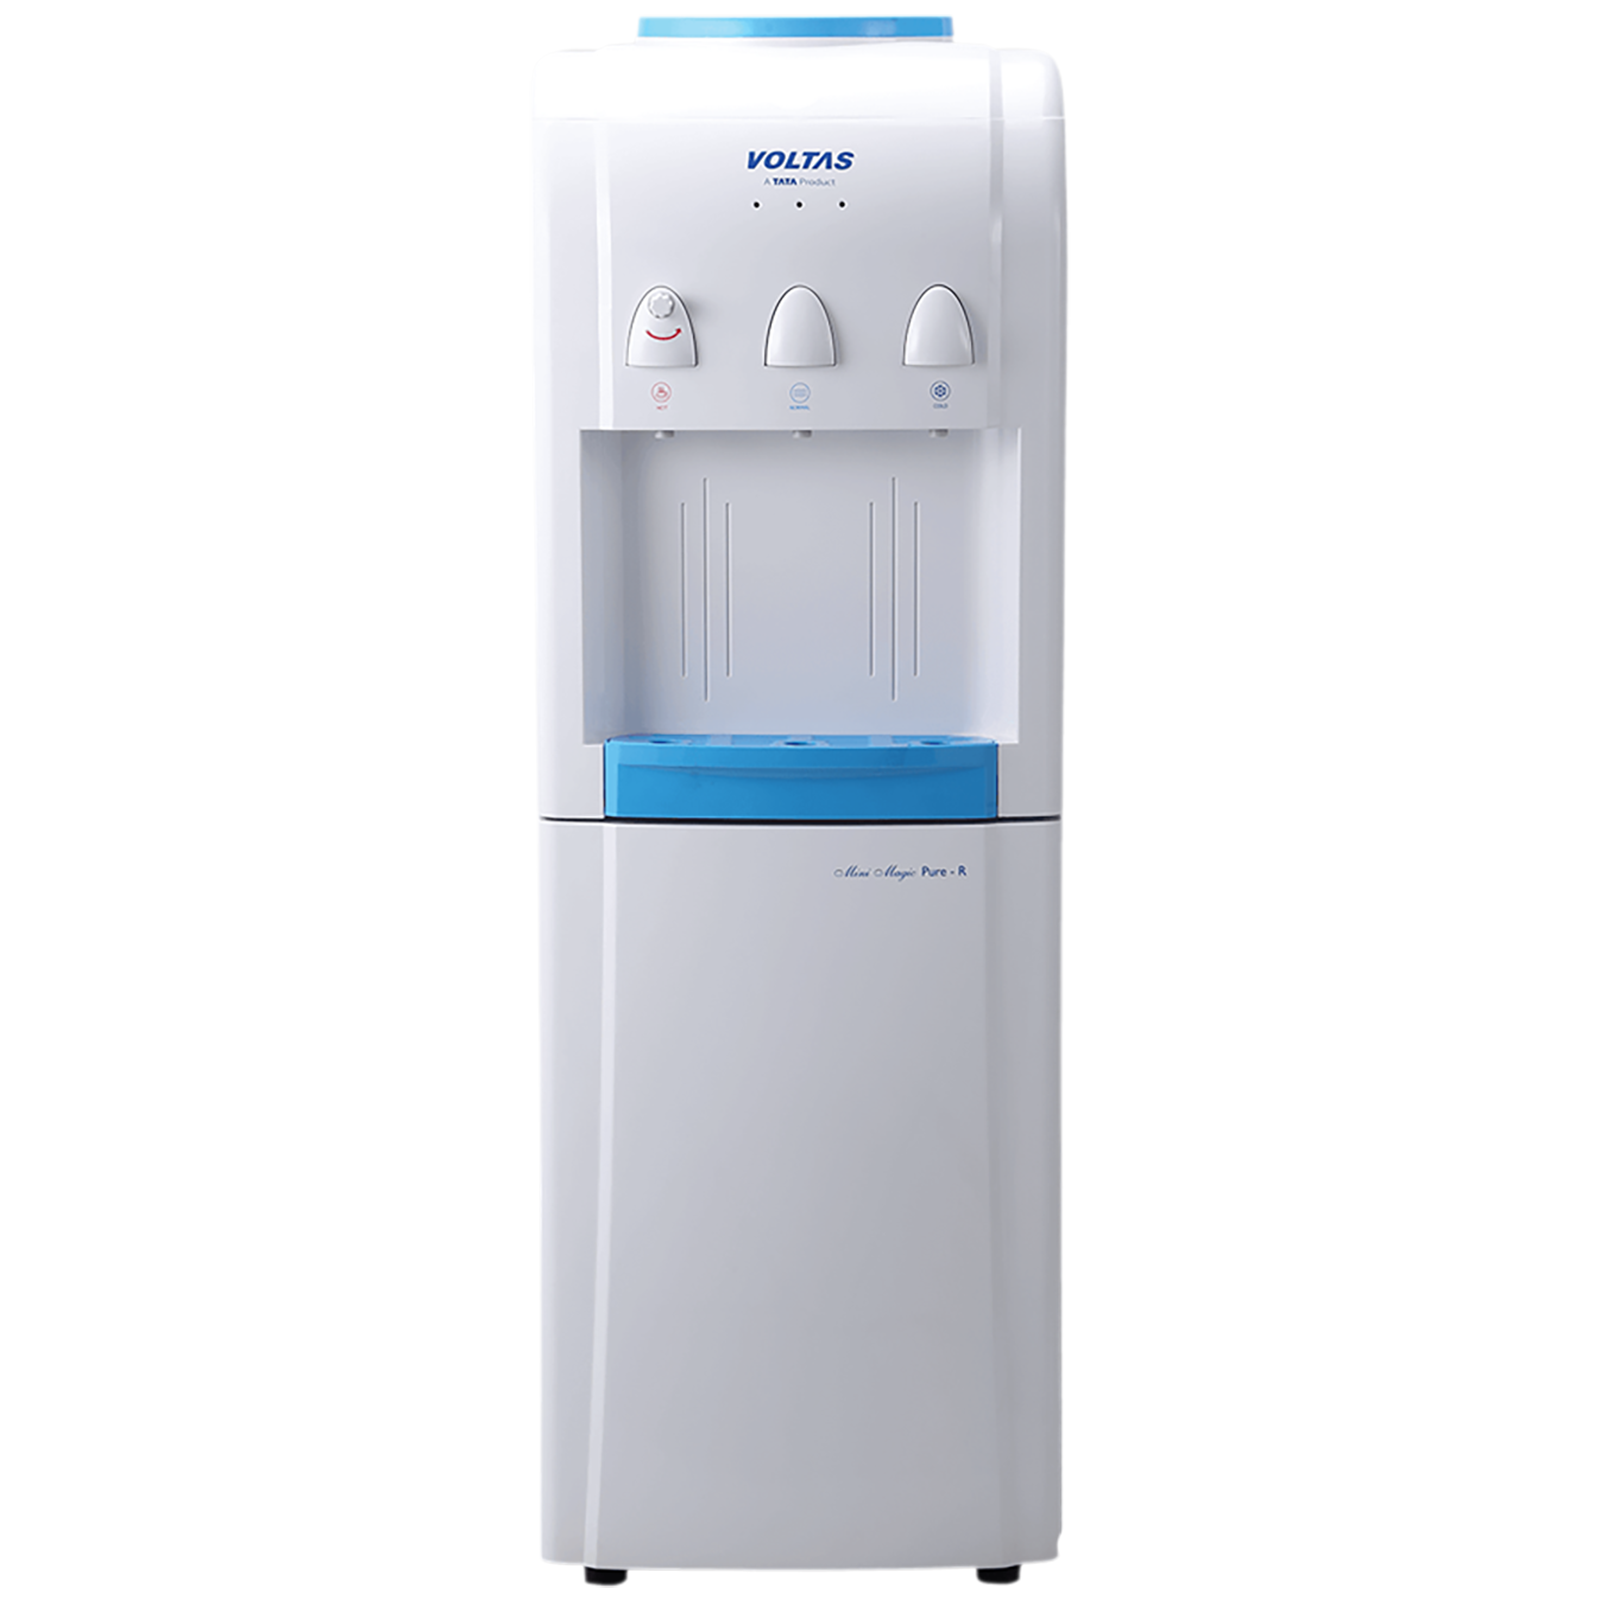 VOLTAS Minimagic Pure R Hot, Cold & Normal Top Load Water Dispenser with Cooling Cabinet (White)